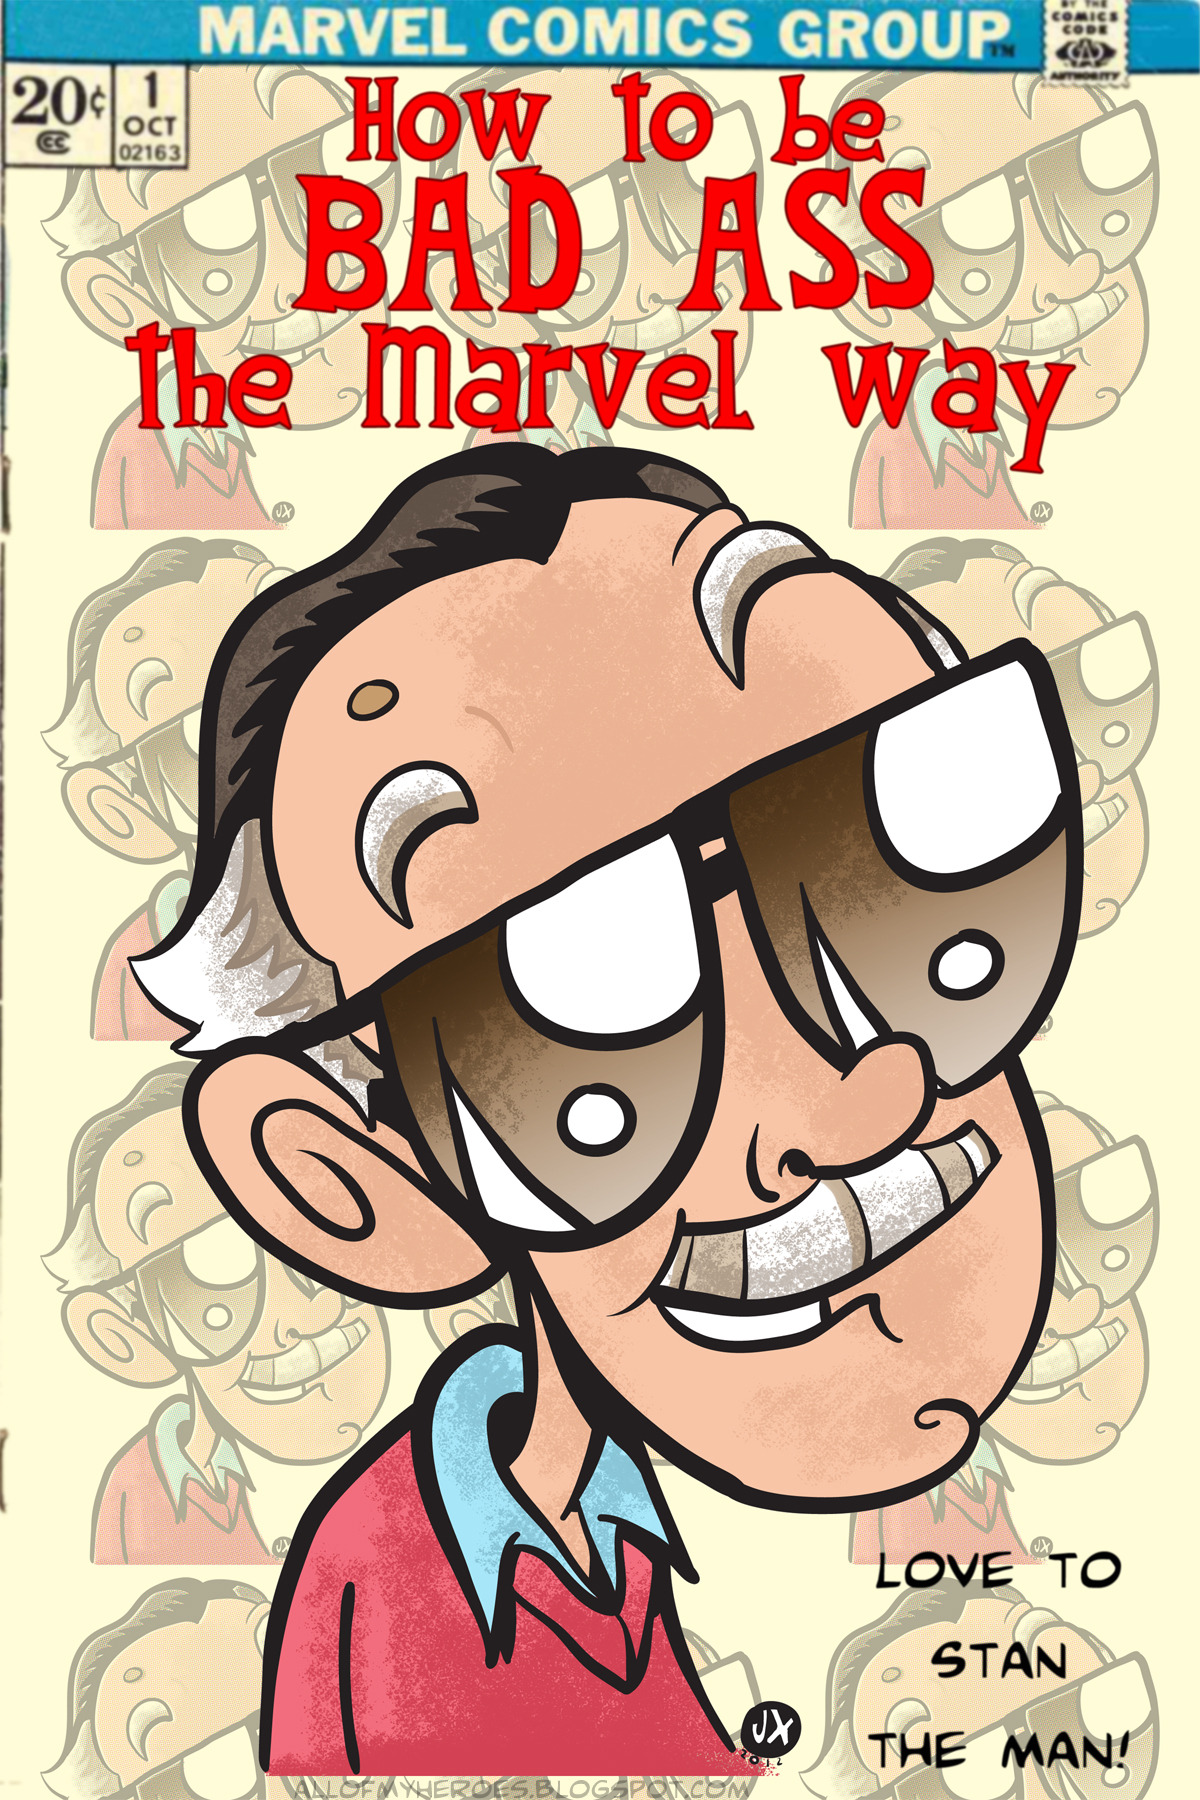 tumblrtoons: “ Watched a great doc on the great Stan Lee yesterday and sketched him as a warm-up before cutting into freelance. I liked it so much I inked it up and colored it. You’re the best Stan! Thanks for all the comics, heroes, and all you’ve...